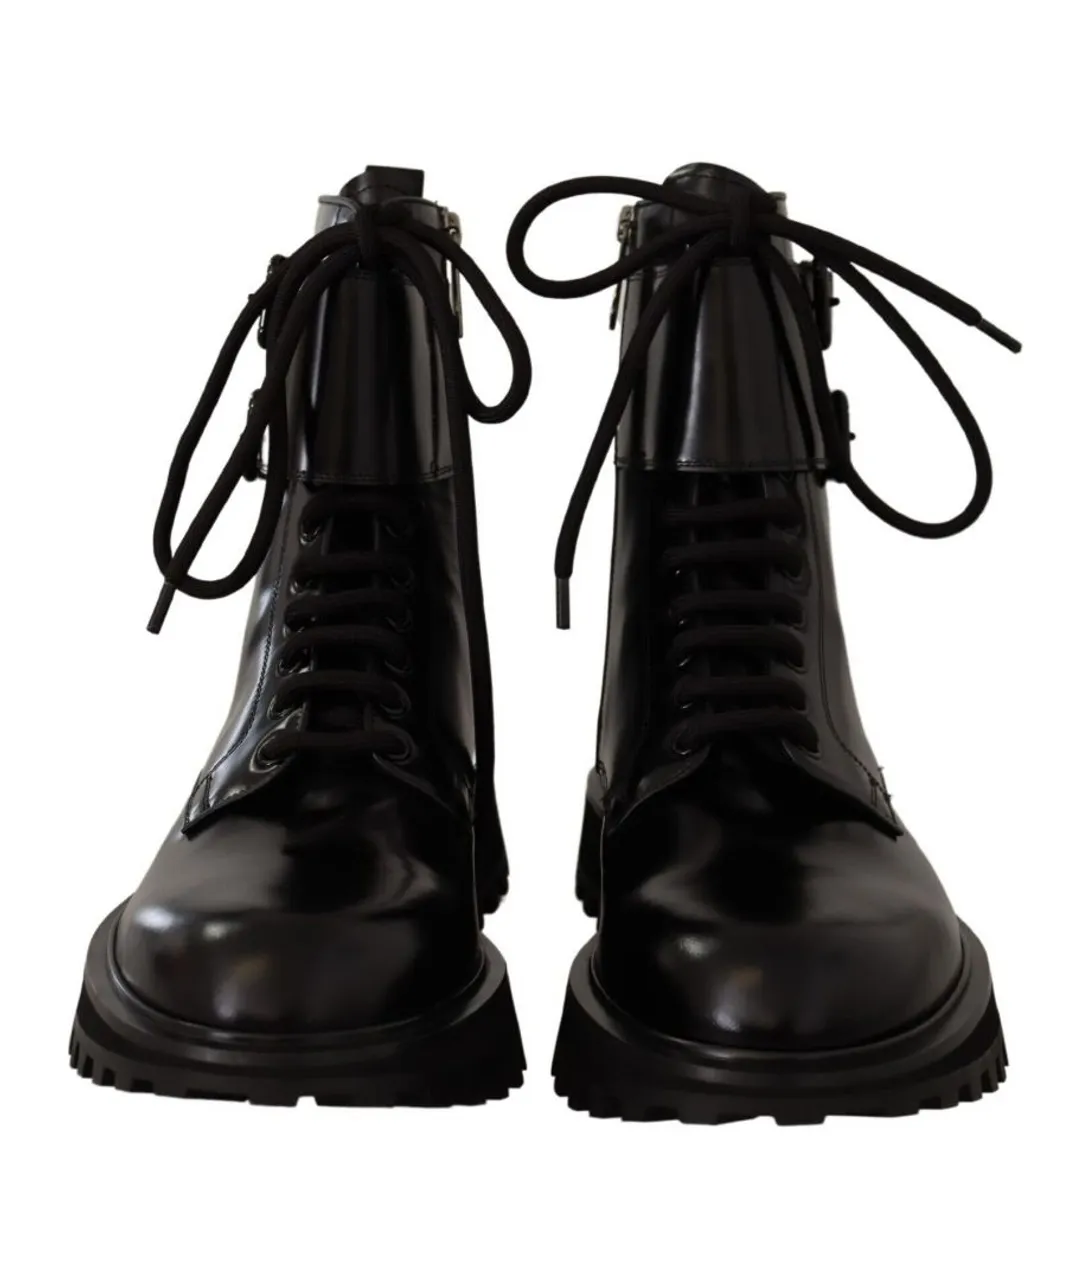 Dolce & Gabbana Mens Black Leather Combat Lace Up Boots Shoes Calf Leather